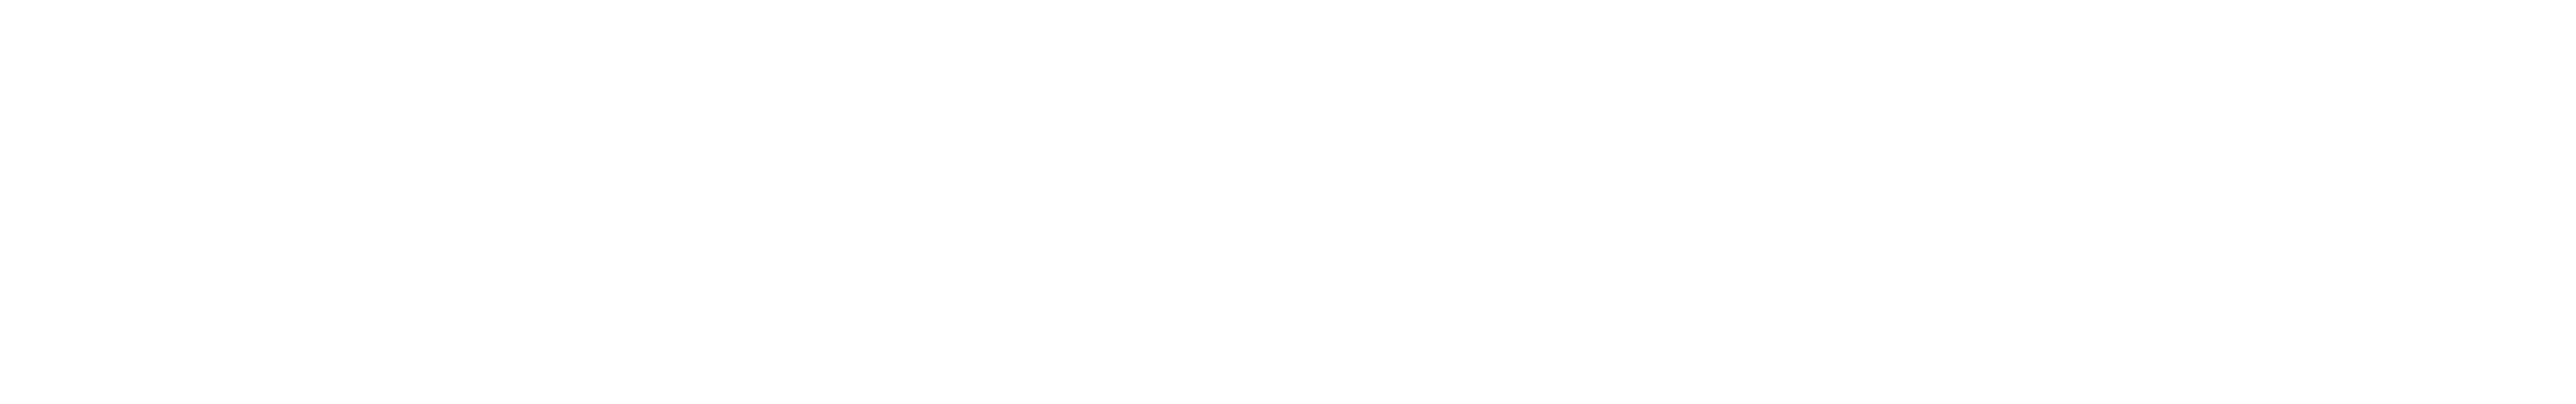 PartnerCo Products